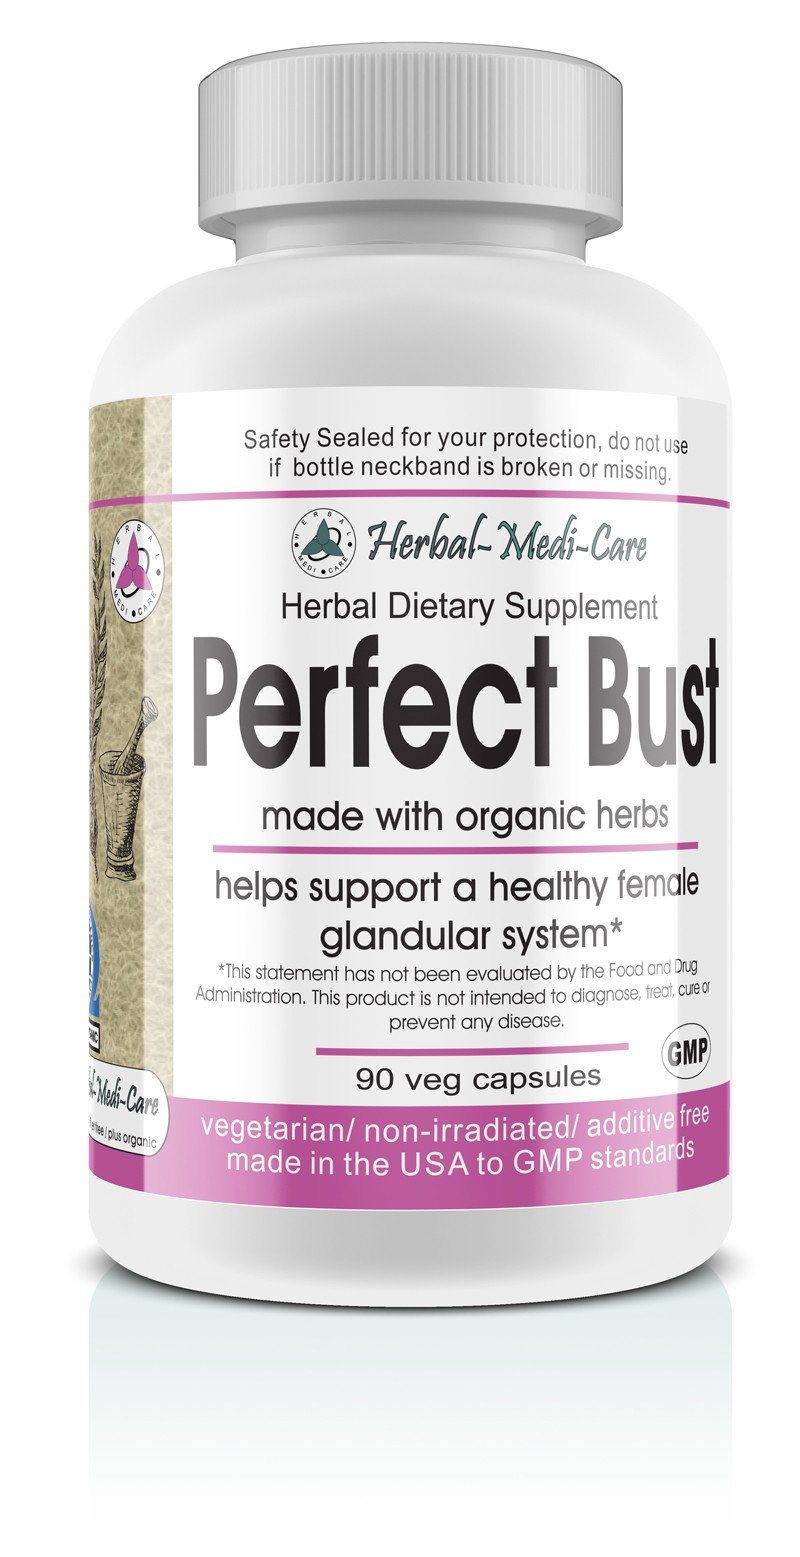 Herbal-Medi-Care Whole Food Perfect Bust (Breast Health) Vegetarian Capsules; 90-Count, Made with Organic - Herbal-Medi-Care Whole Food Perfect Bust (Breast Health) Vegetarian Capsules; 90-Count, Made with Organic - Herbal-Medi-Care Whole Food Perfect Bust (Breast Health) Vegetarian Capsules; 90-Count, Made with Organic